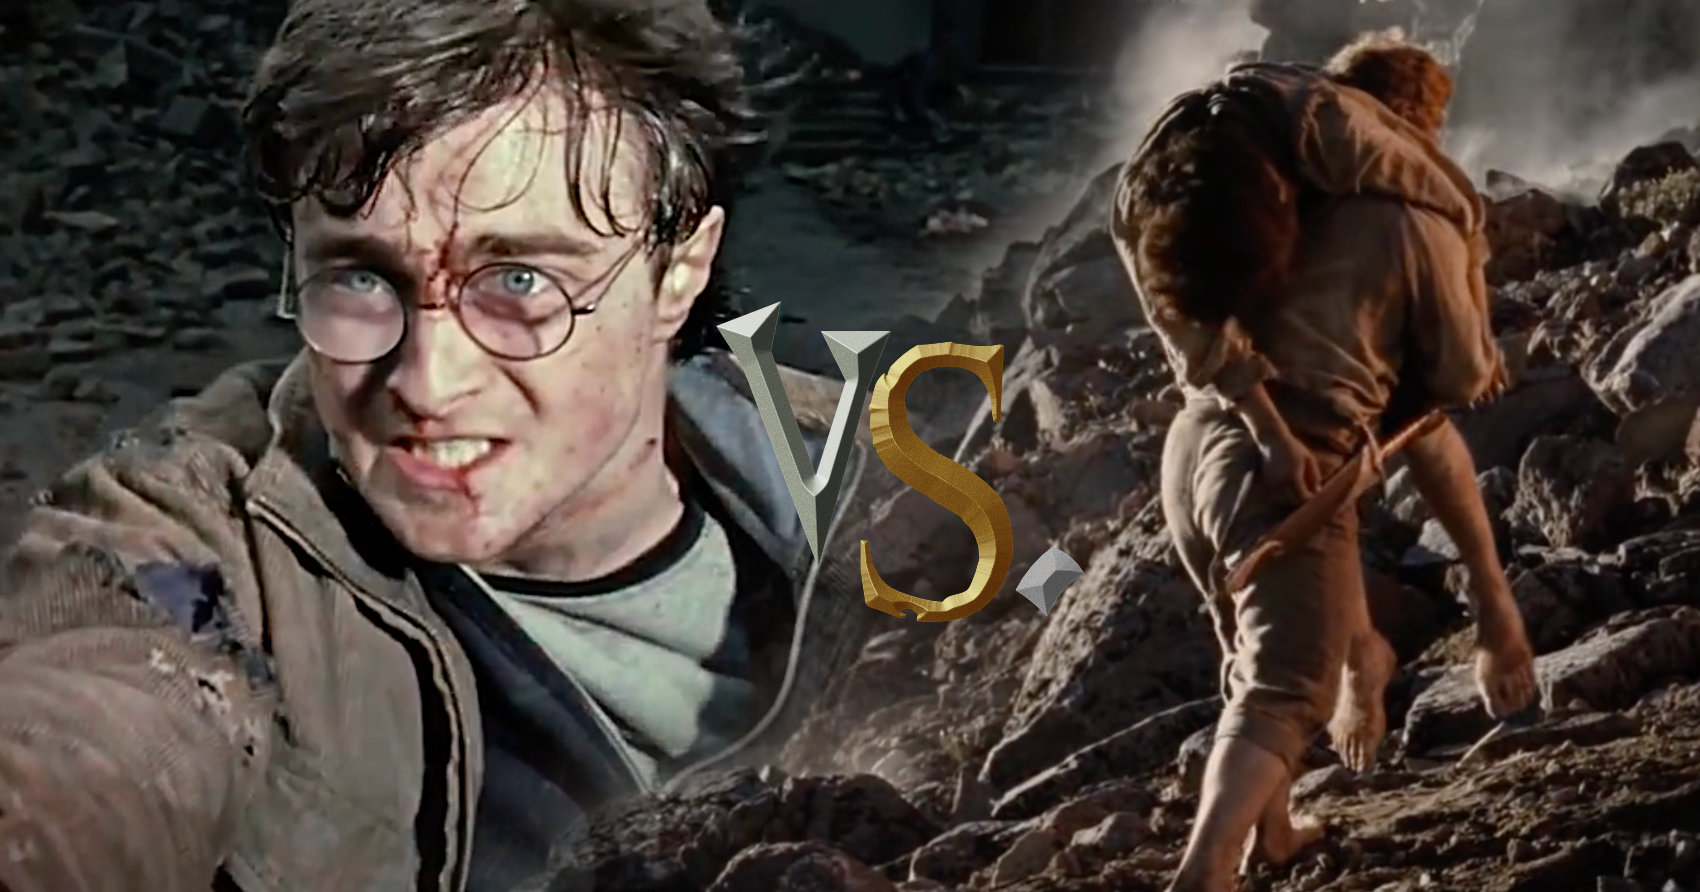 Harry Potter Versus The Lord of the Rings